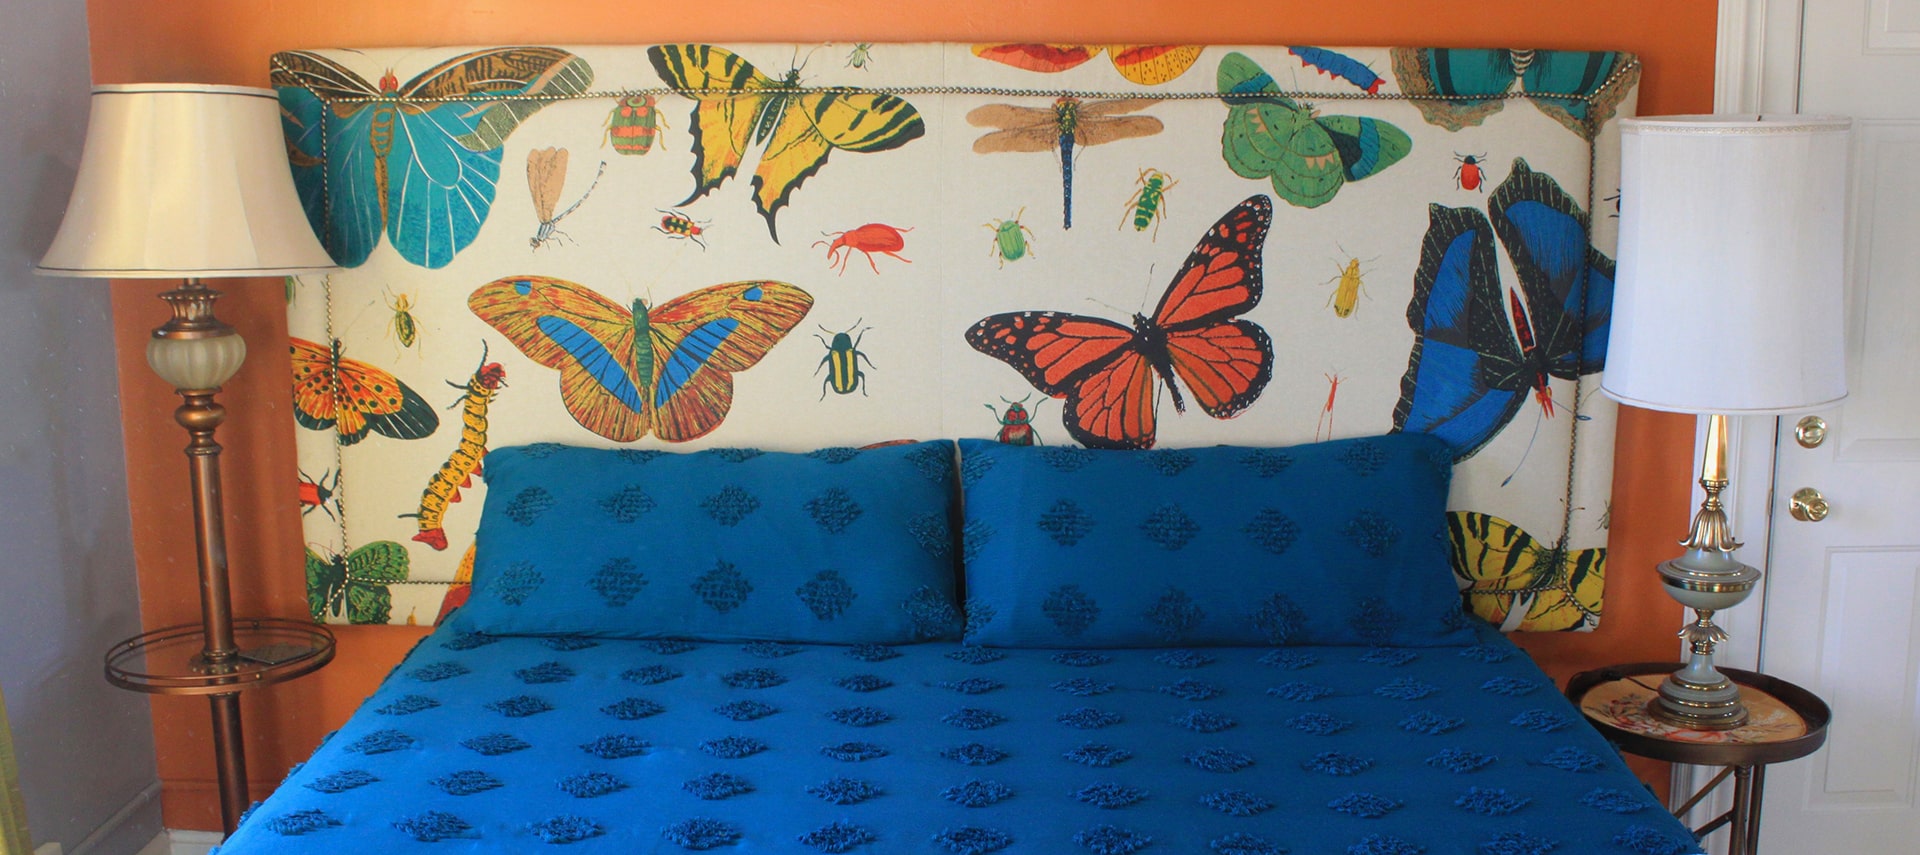 A queen-sized bed with blue bedspread and pillows, a headboard with butterfly pattern, and 2 lamps, in a room with orange walls.